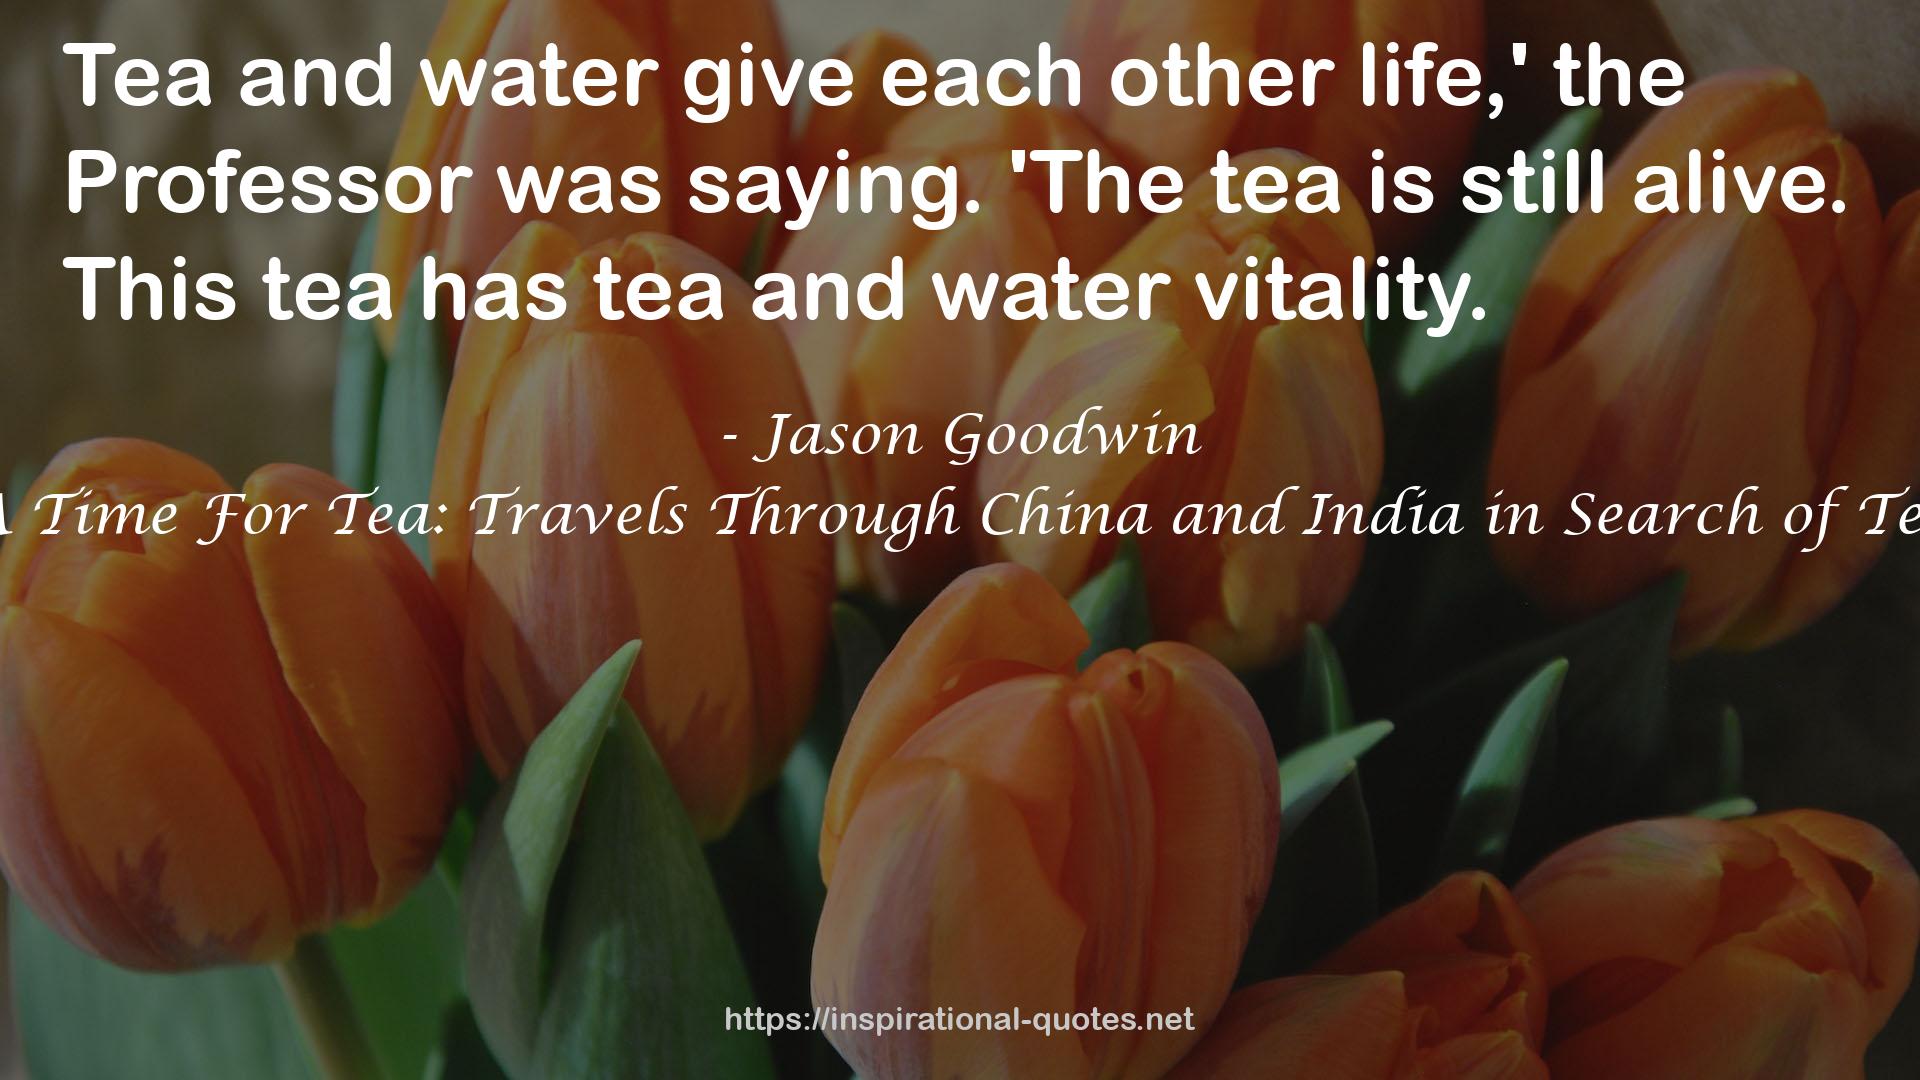 A Time For Tea: Travels Through China and India in Search of Tea QUOTES